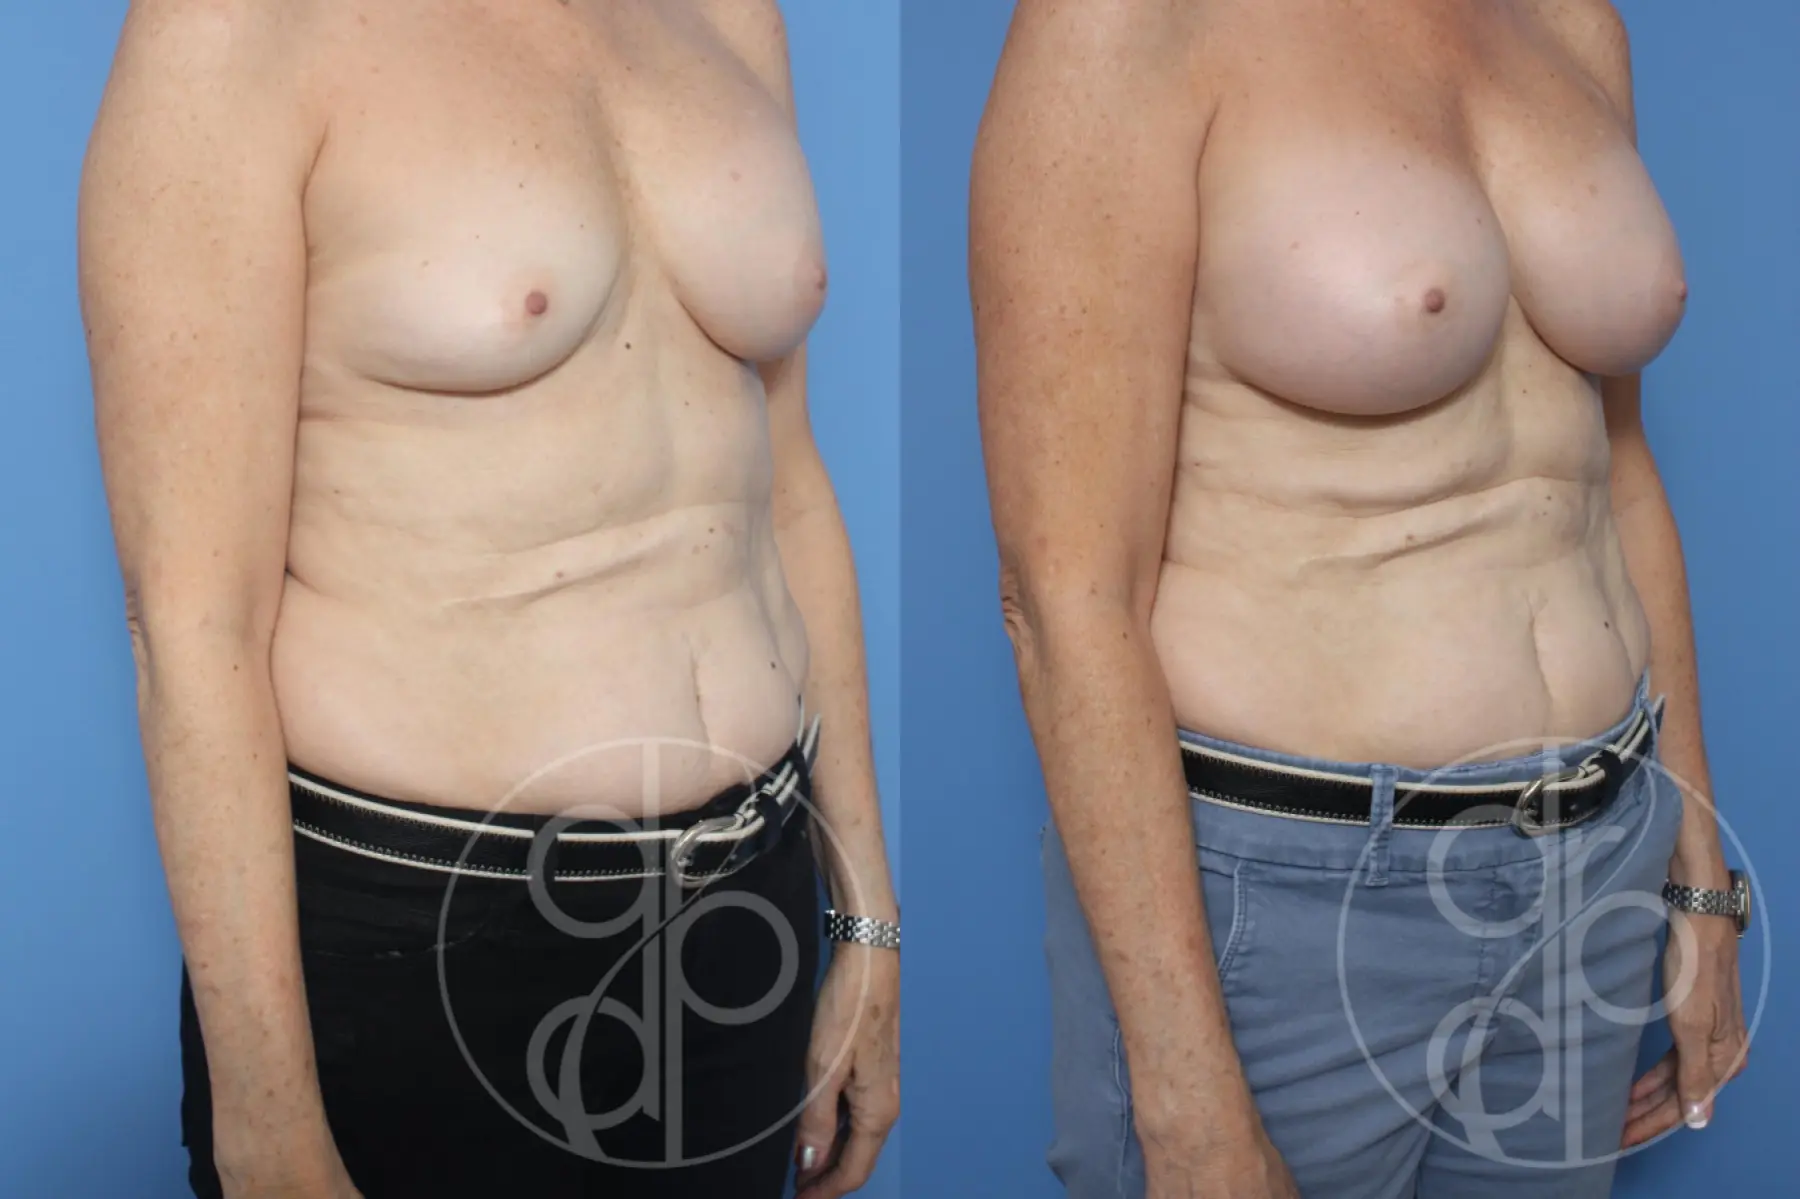 patient 12045 remove and replace breast implants before and after result - Before and After 2